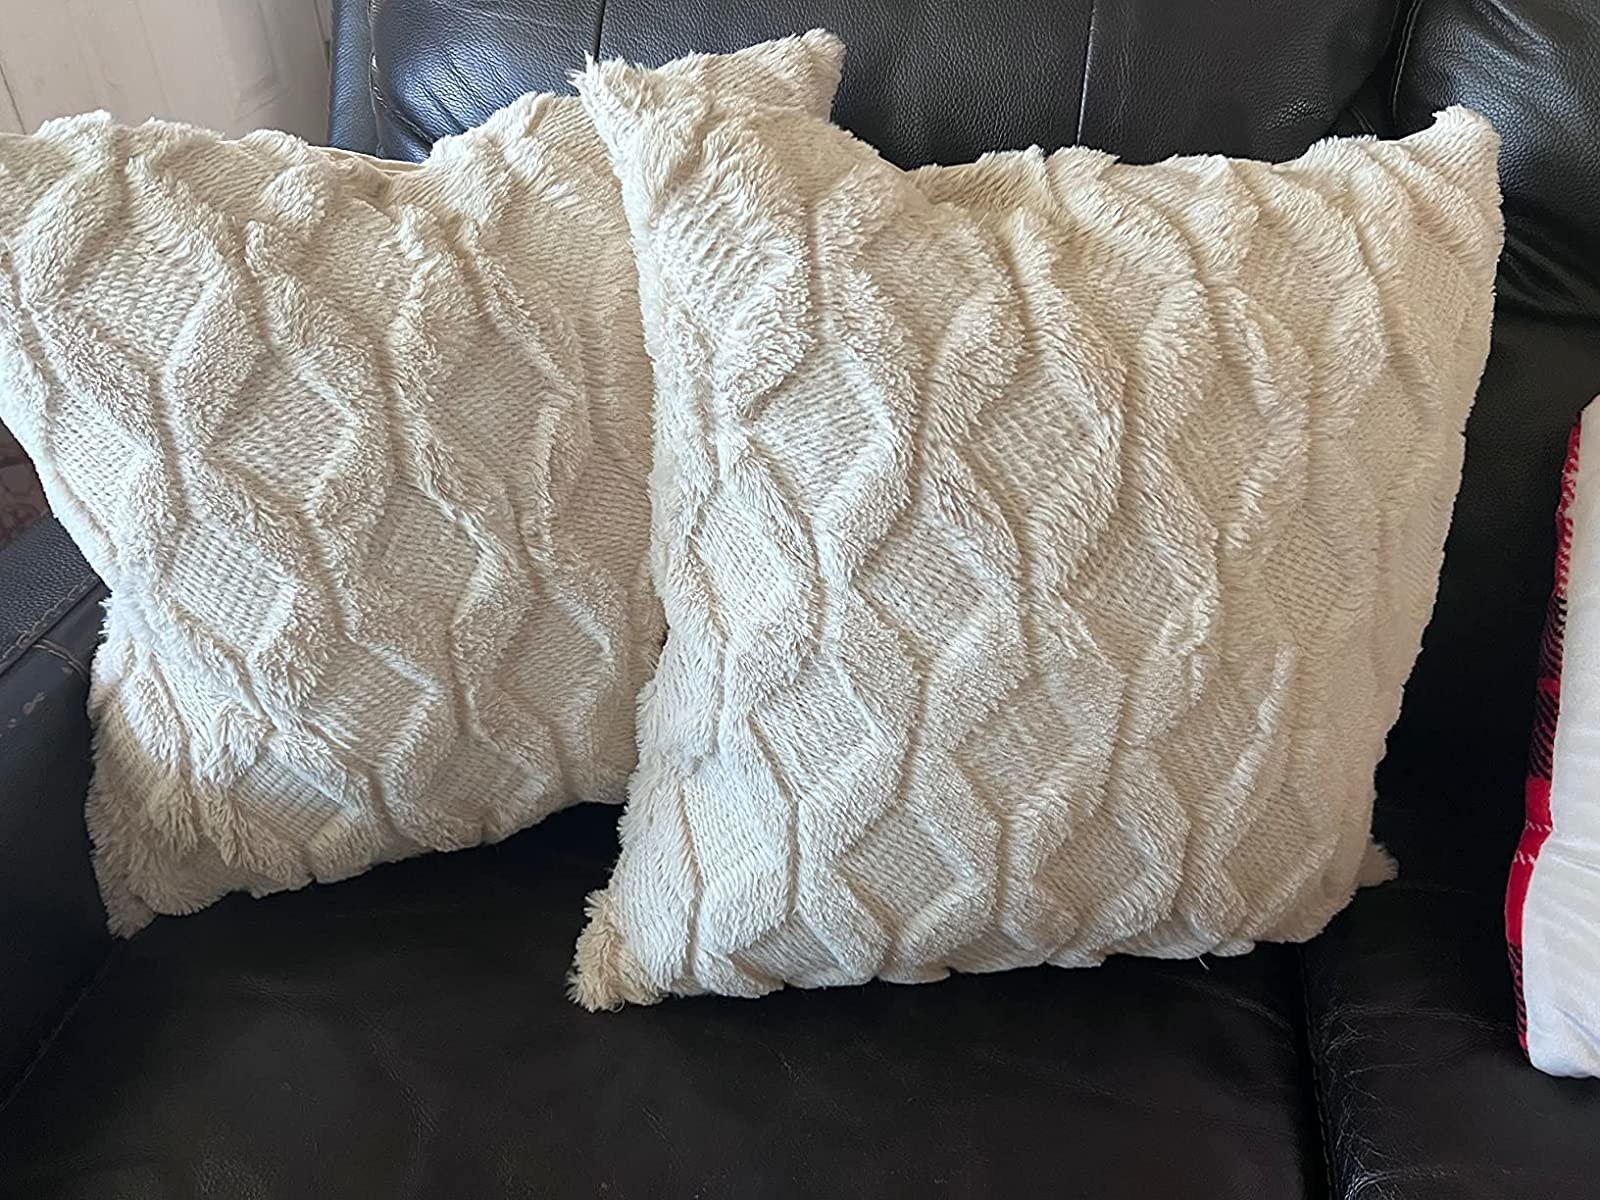 Reviewer image of textured cream pillows